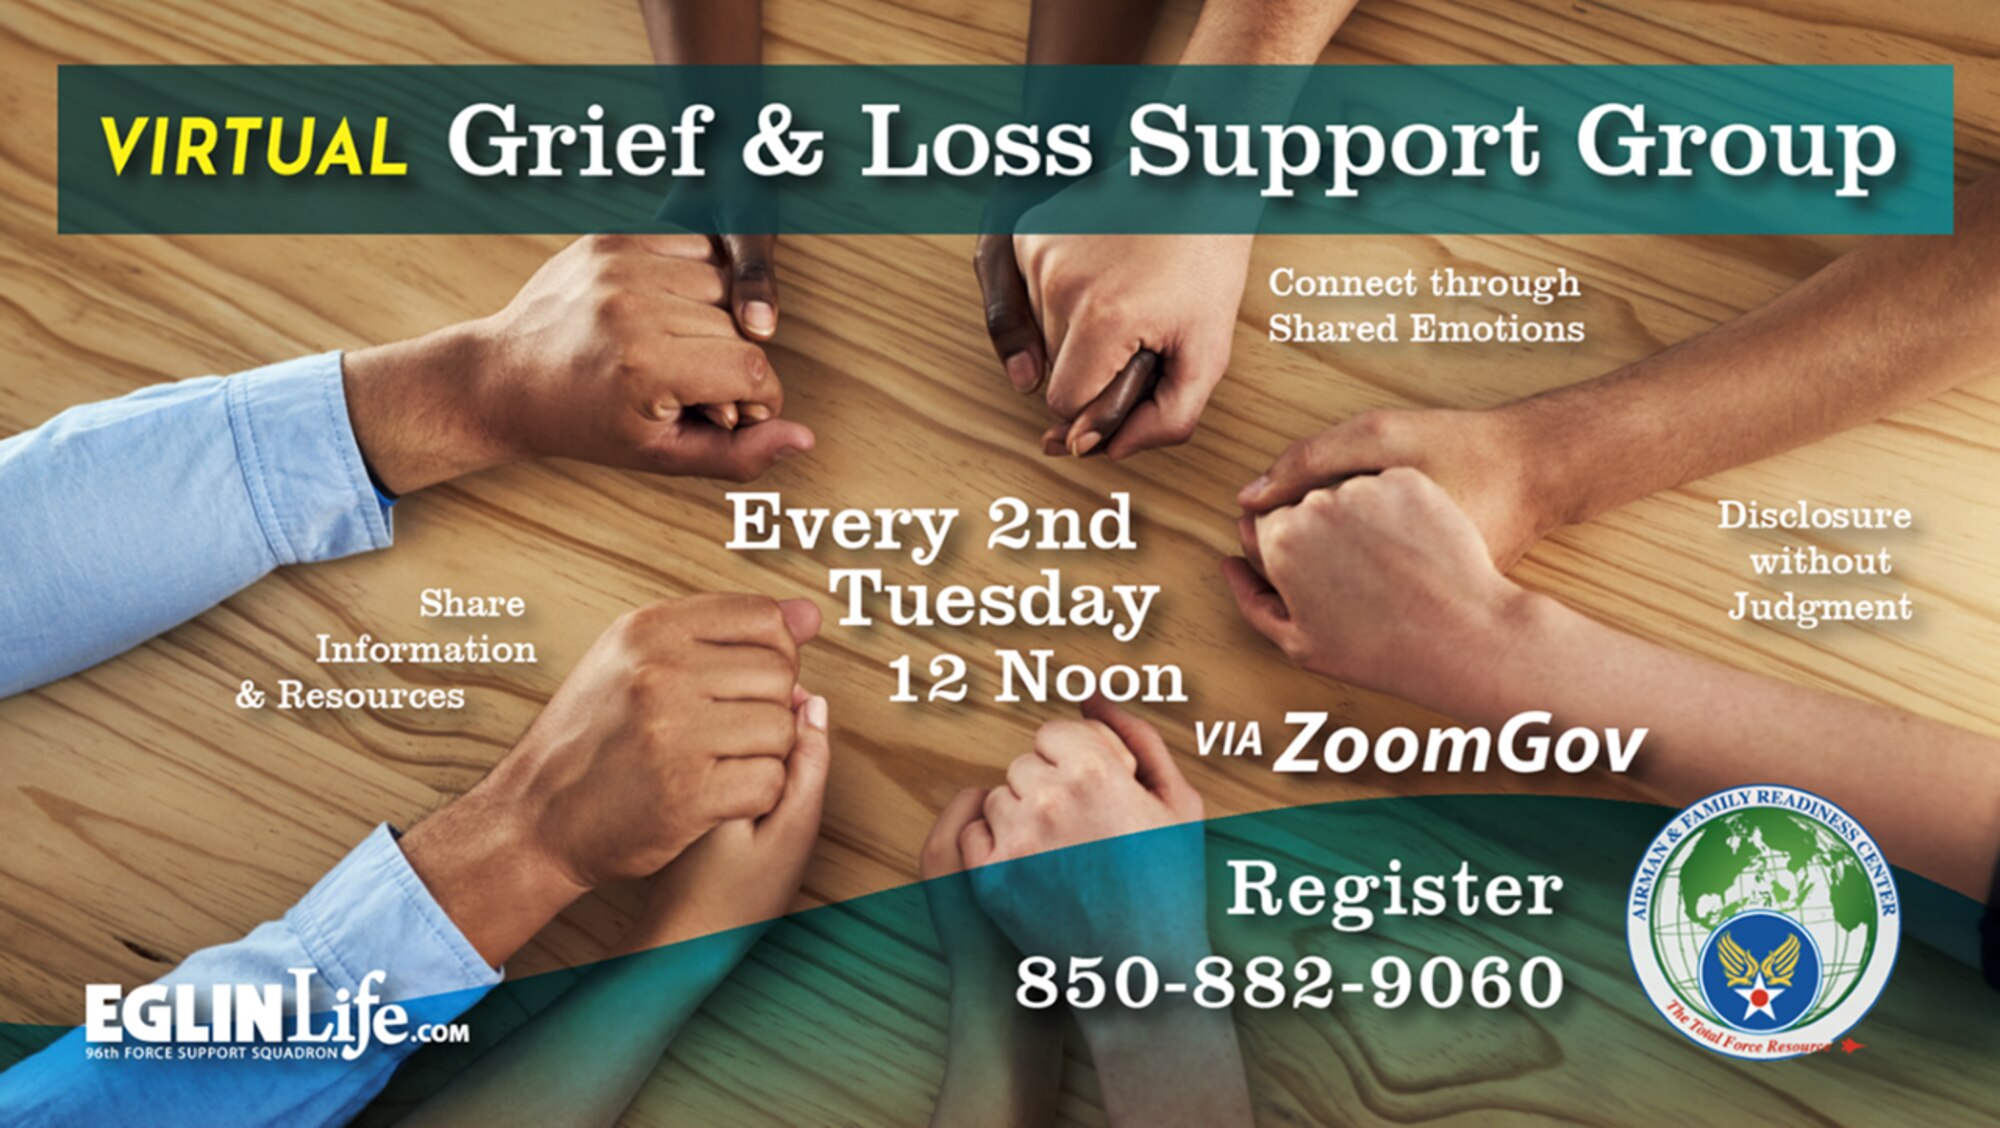 Support available for coping with grief, loss